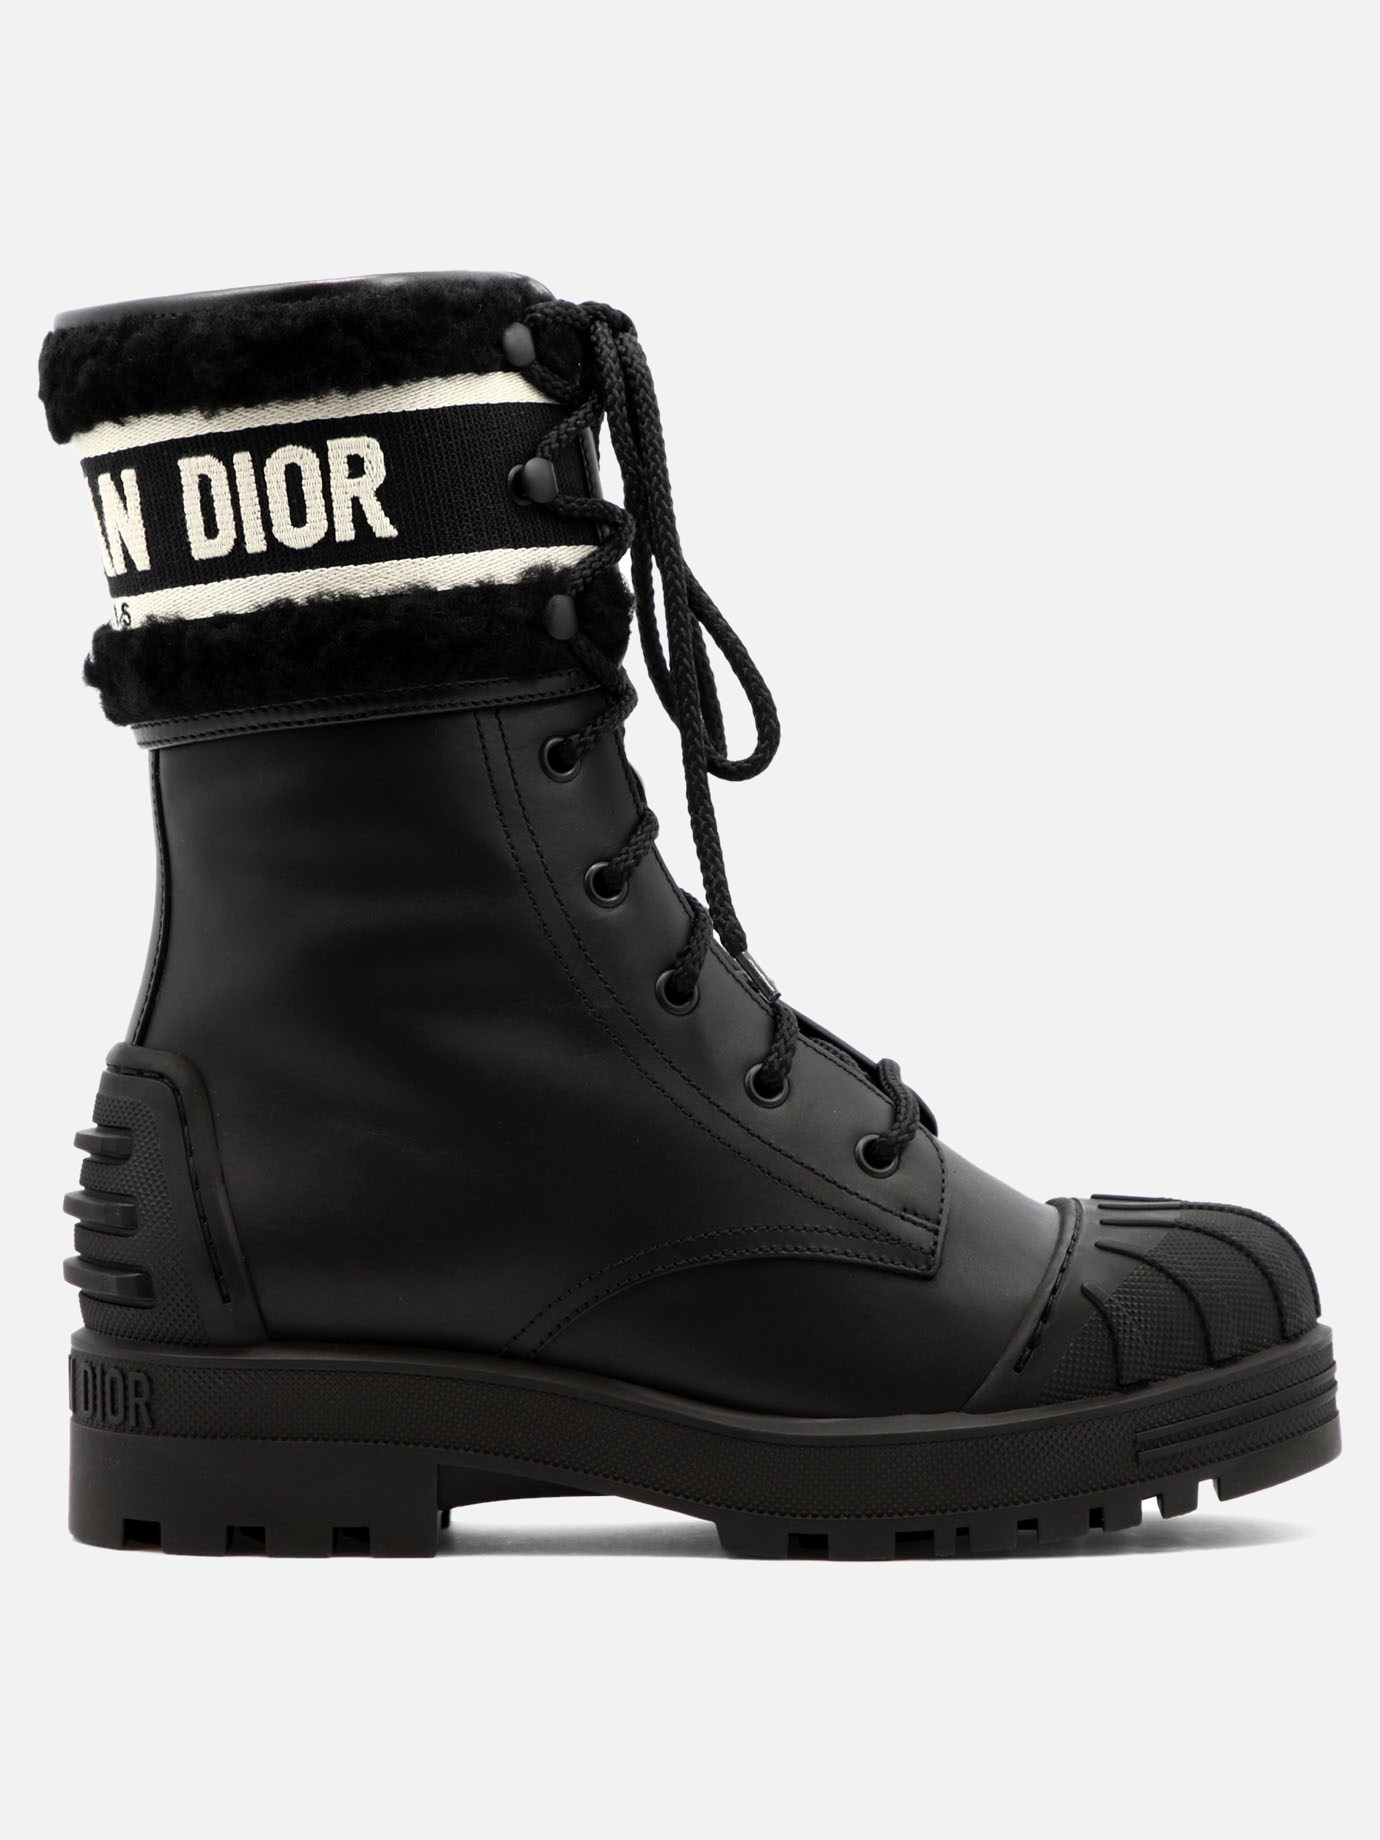  D-Major  ankle boots by Dior